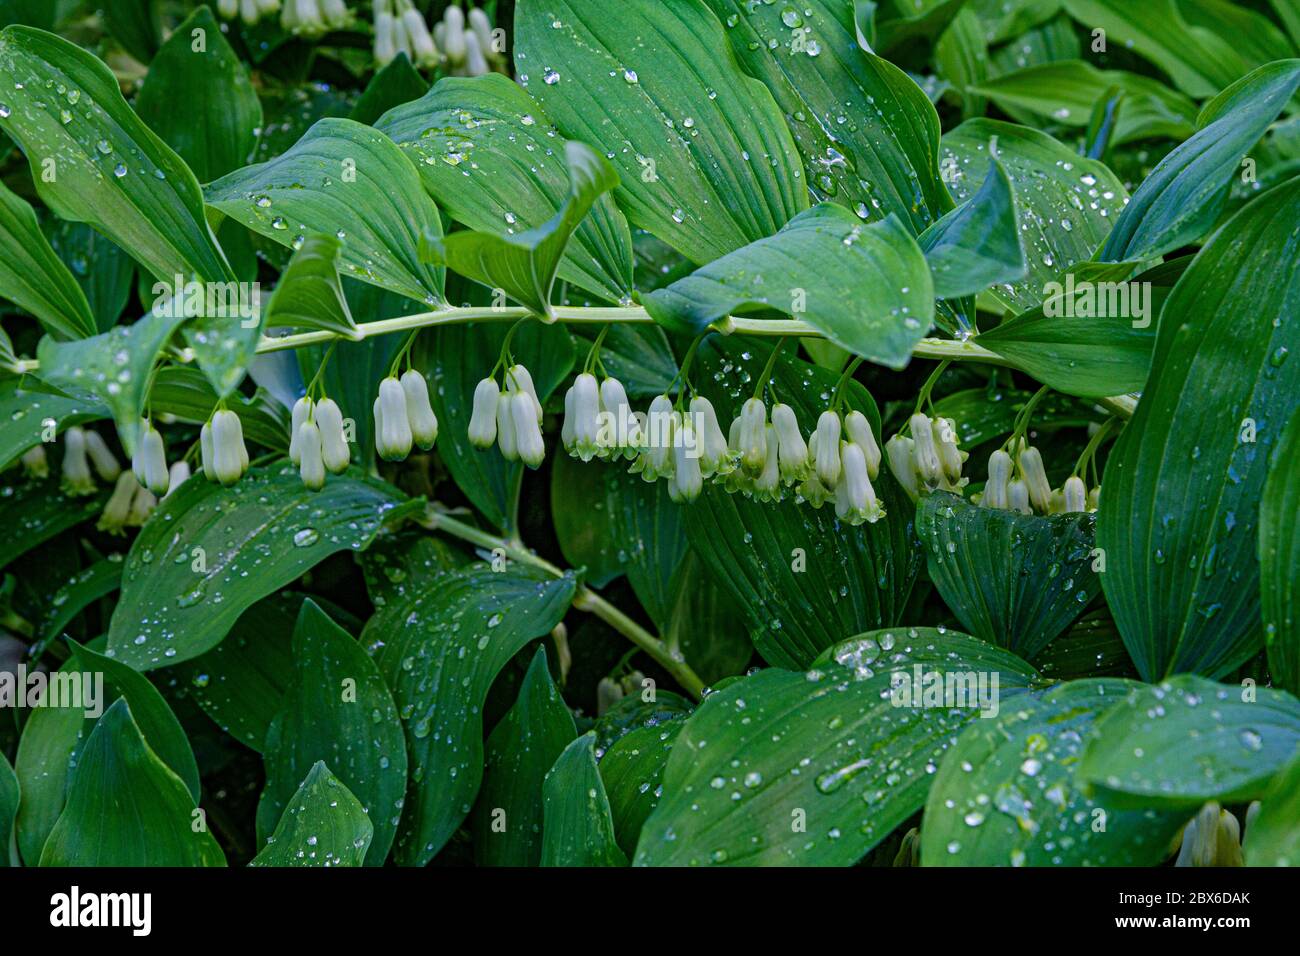 Polygonatum, also known as King Solomon's-seal or Solomon's seal, is a flowering plant. Stock Photo